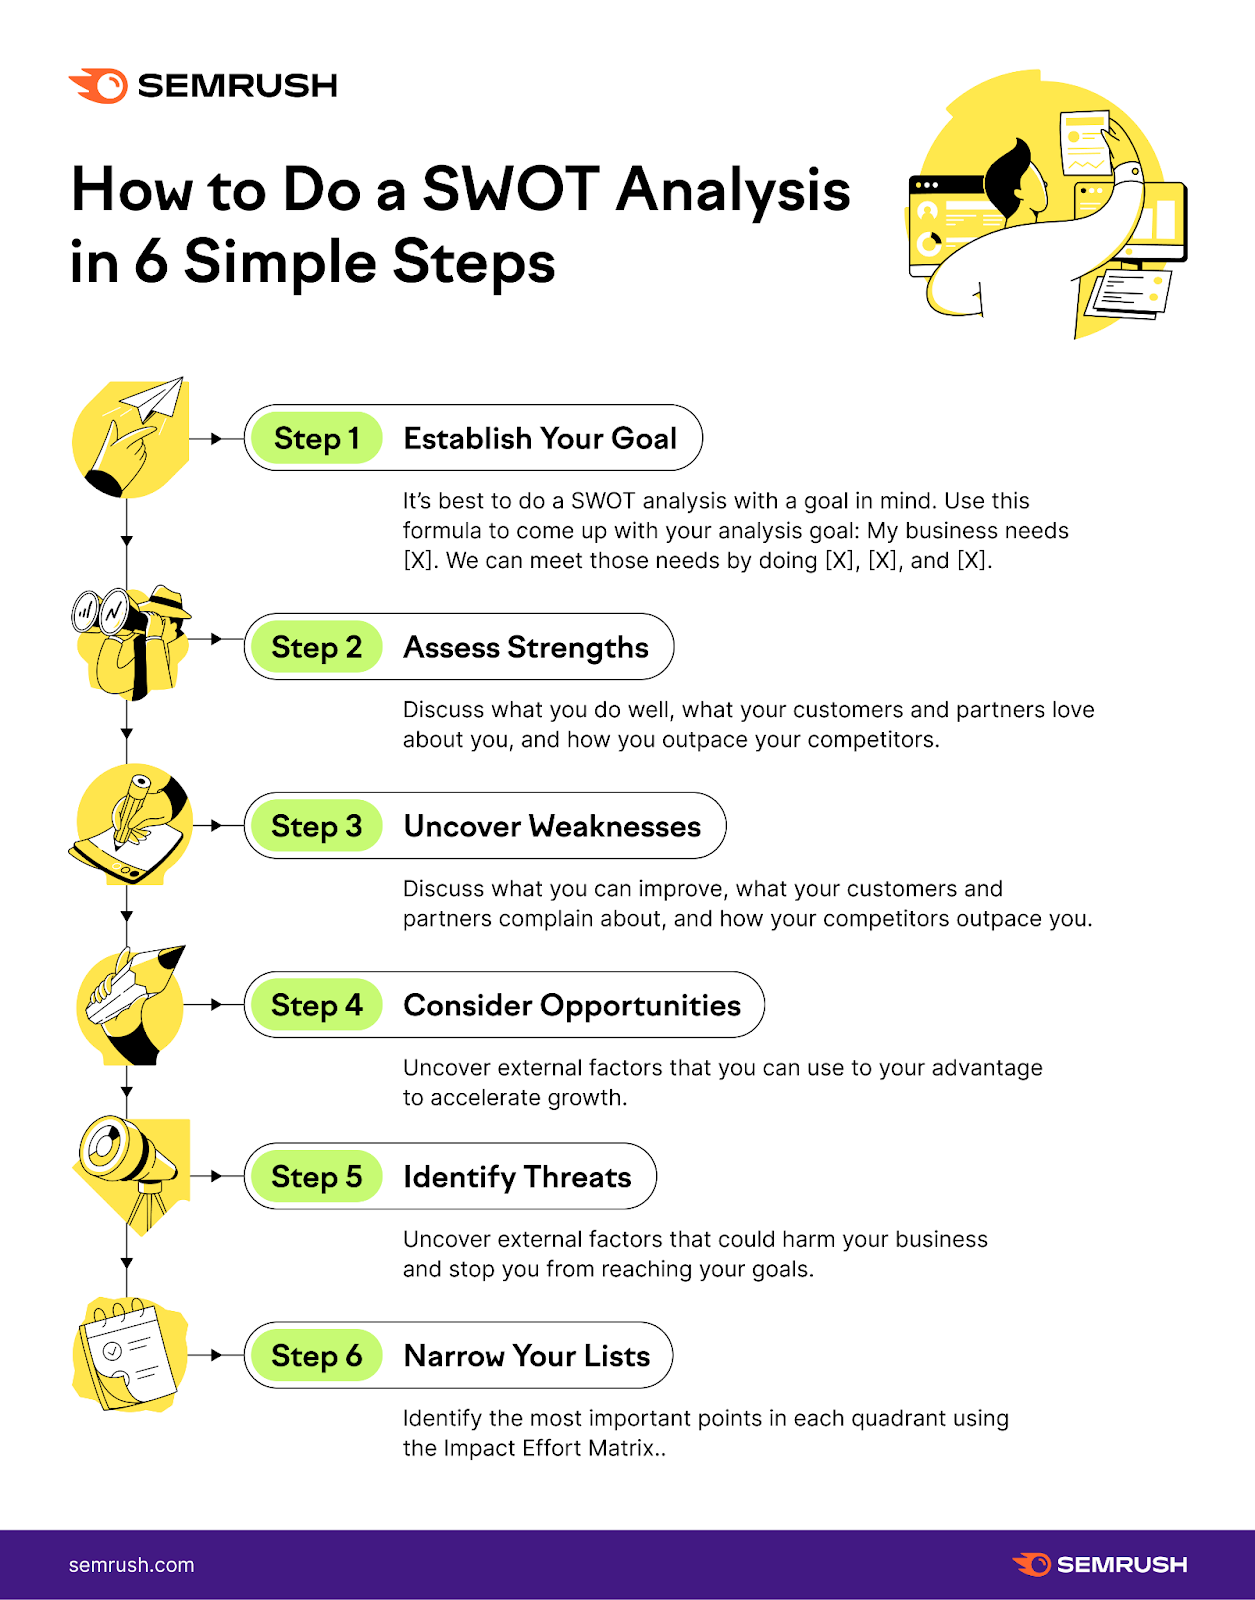 The six steps of a SWOT analysis